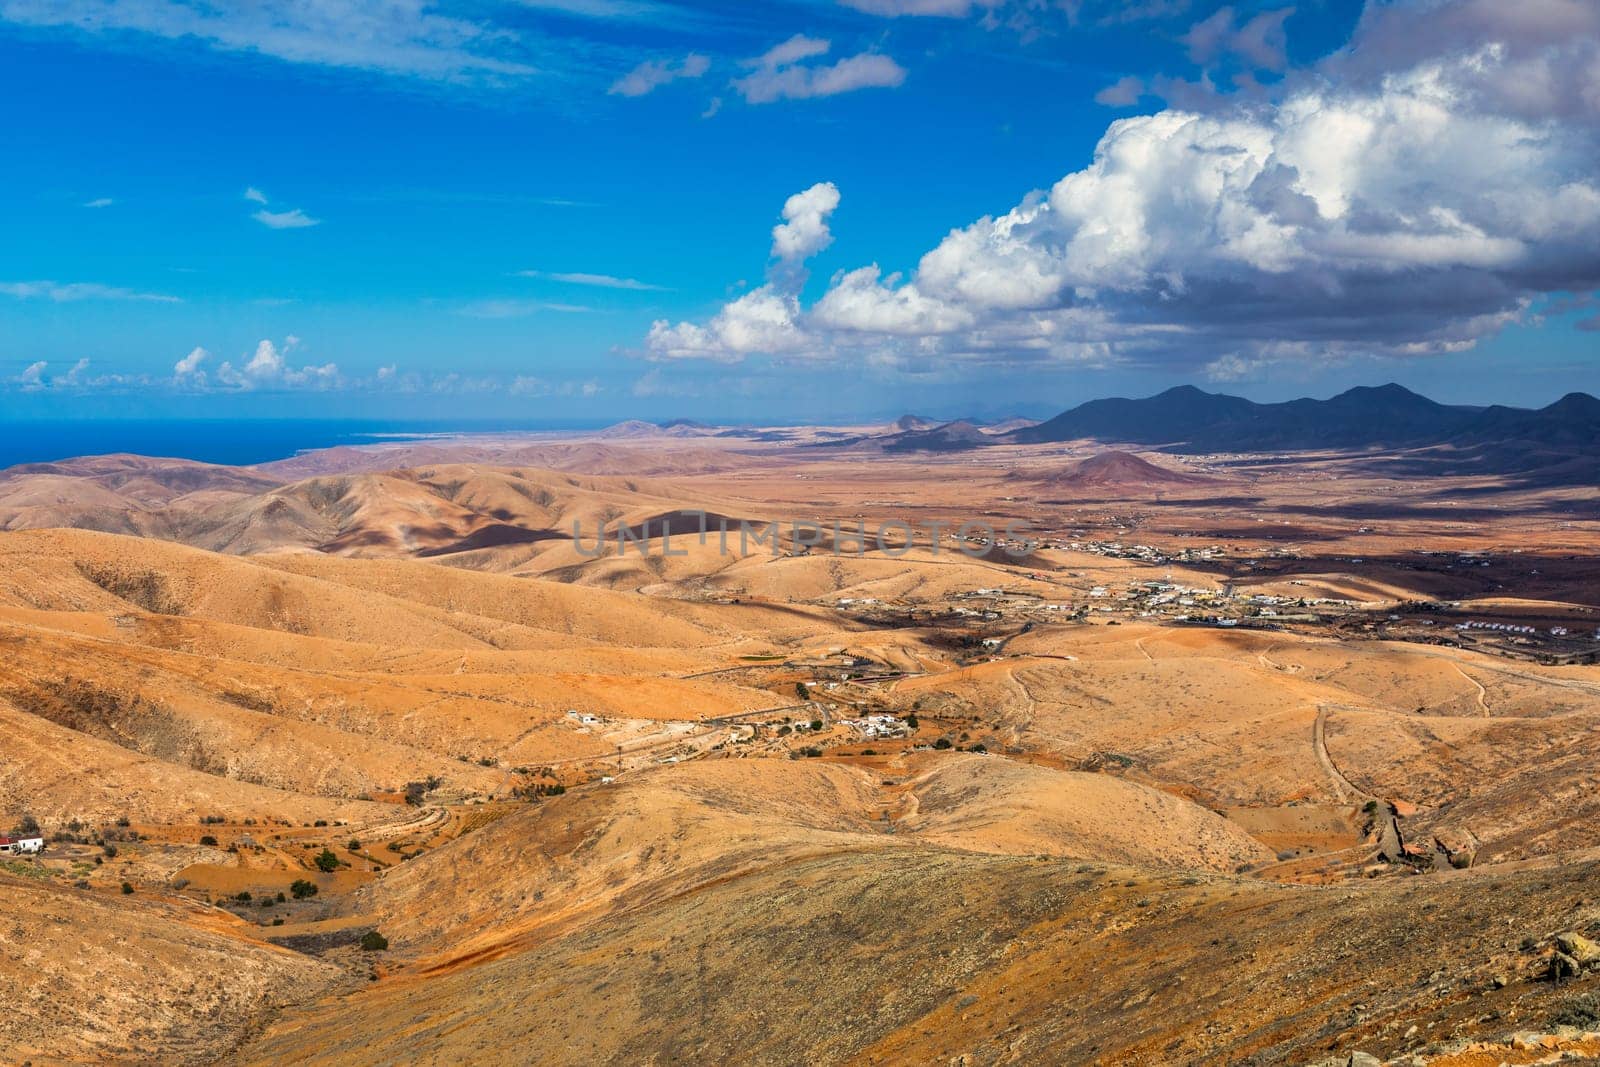 Betancuria National Park on the Fuerteventura Island, Canary Islands, Spain. Spectacular view of the picturesque mountain landscape from the drone of the Betancuria National Park in Fuerteventura by DaLiu